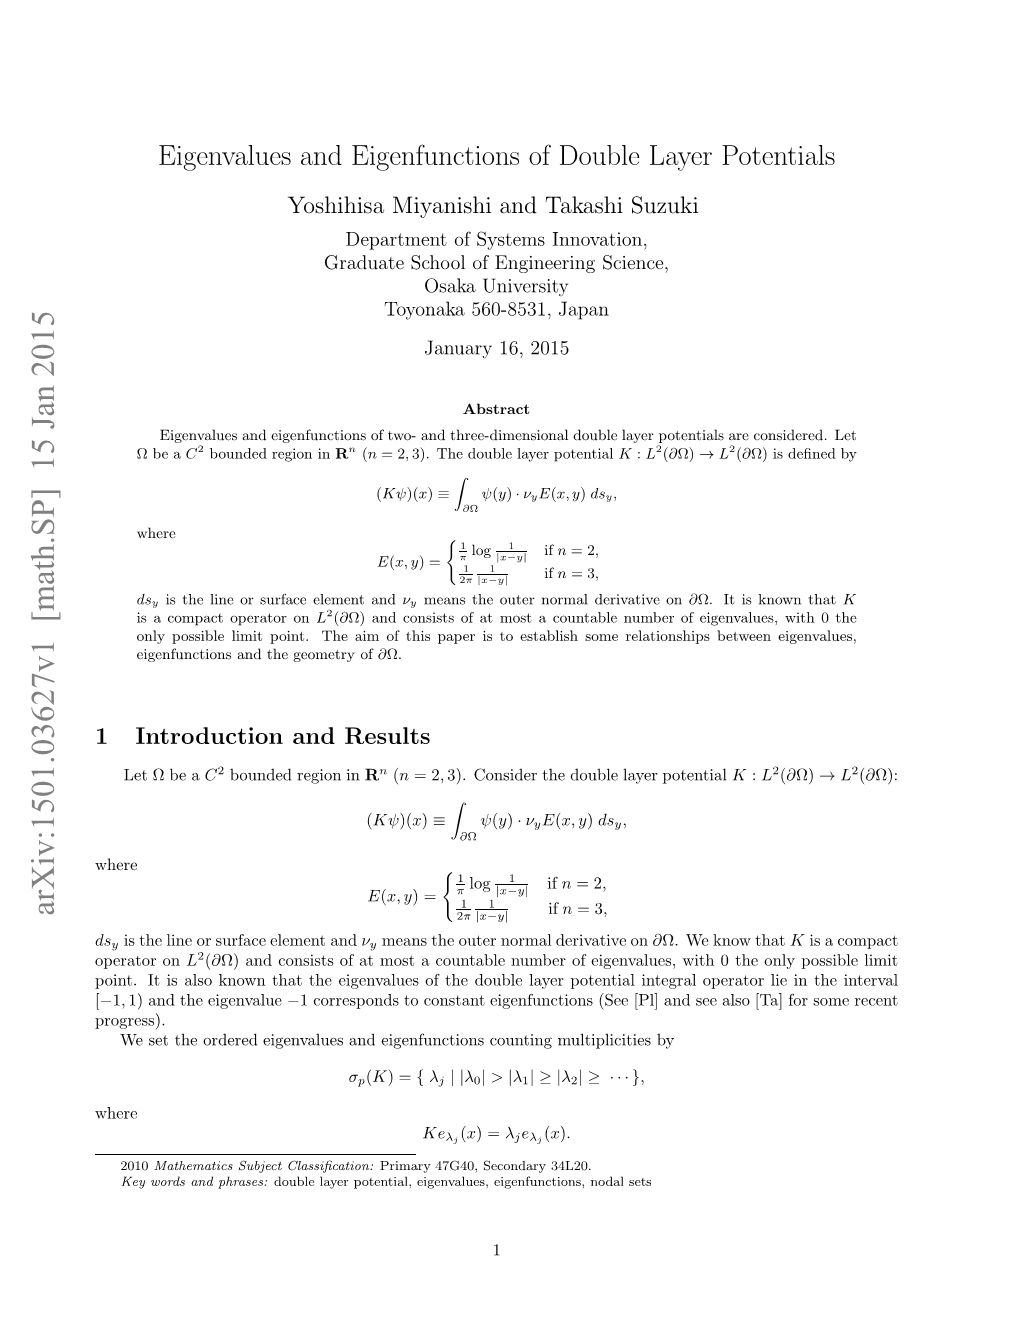 Eigenvalues and Eigenfunctions of Double Layer Potentials